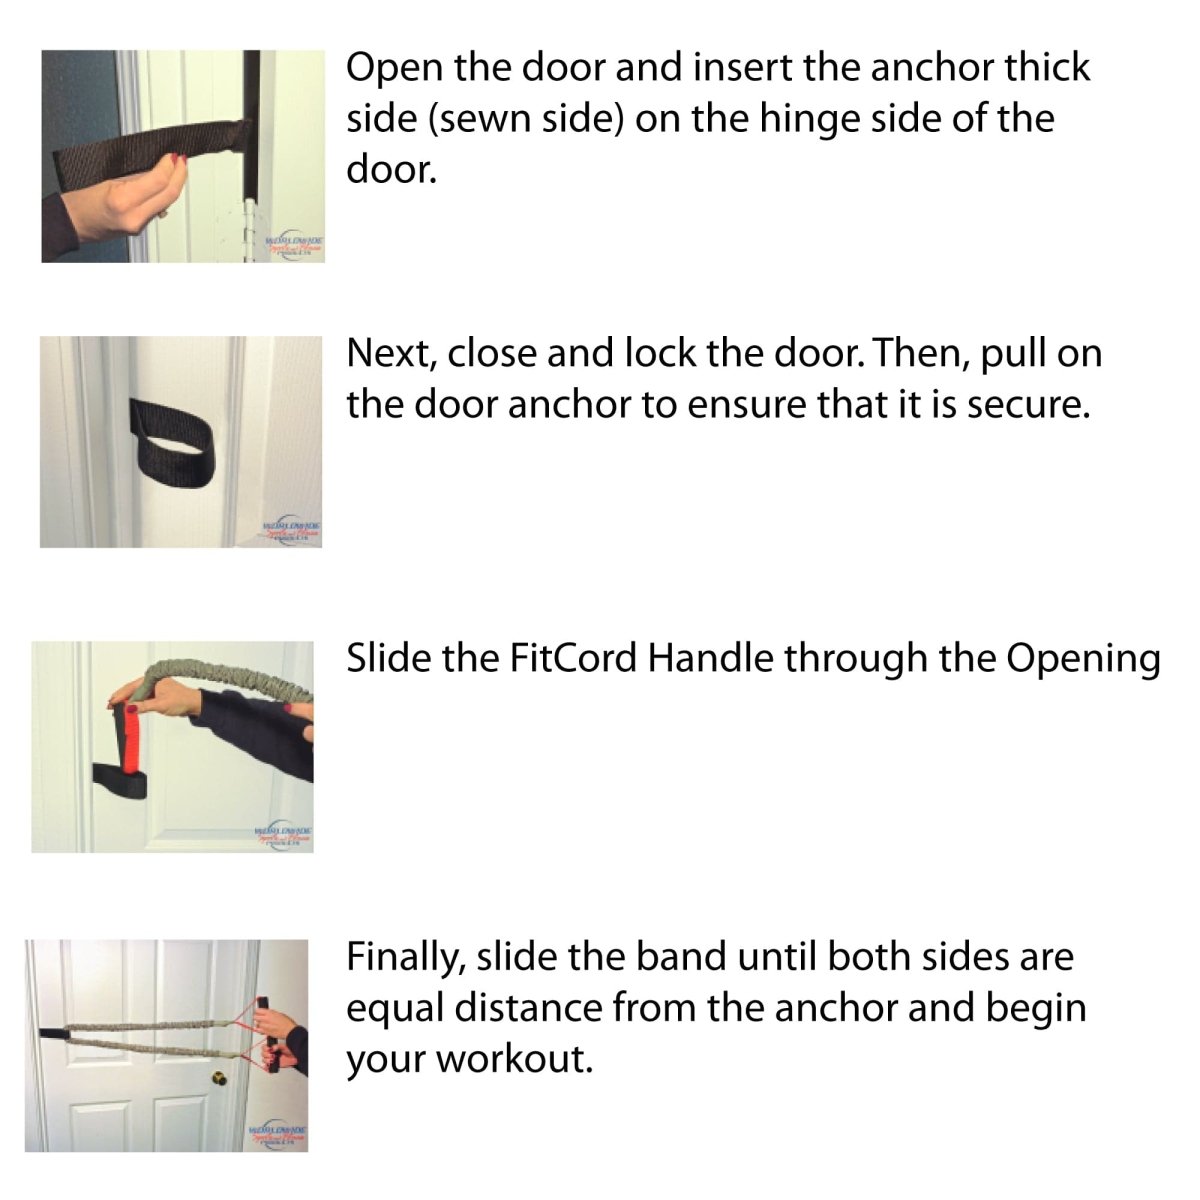 Instructions on using a door anchor for resistance workout exercise bands.  FitCord Anchor use instructions. 